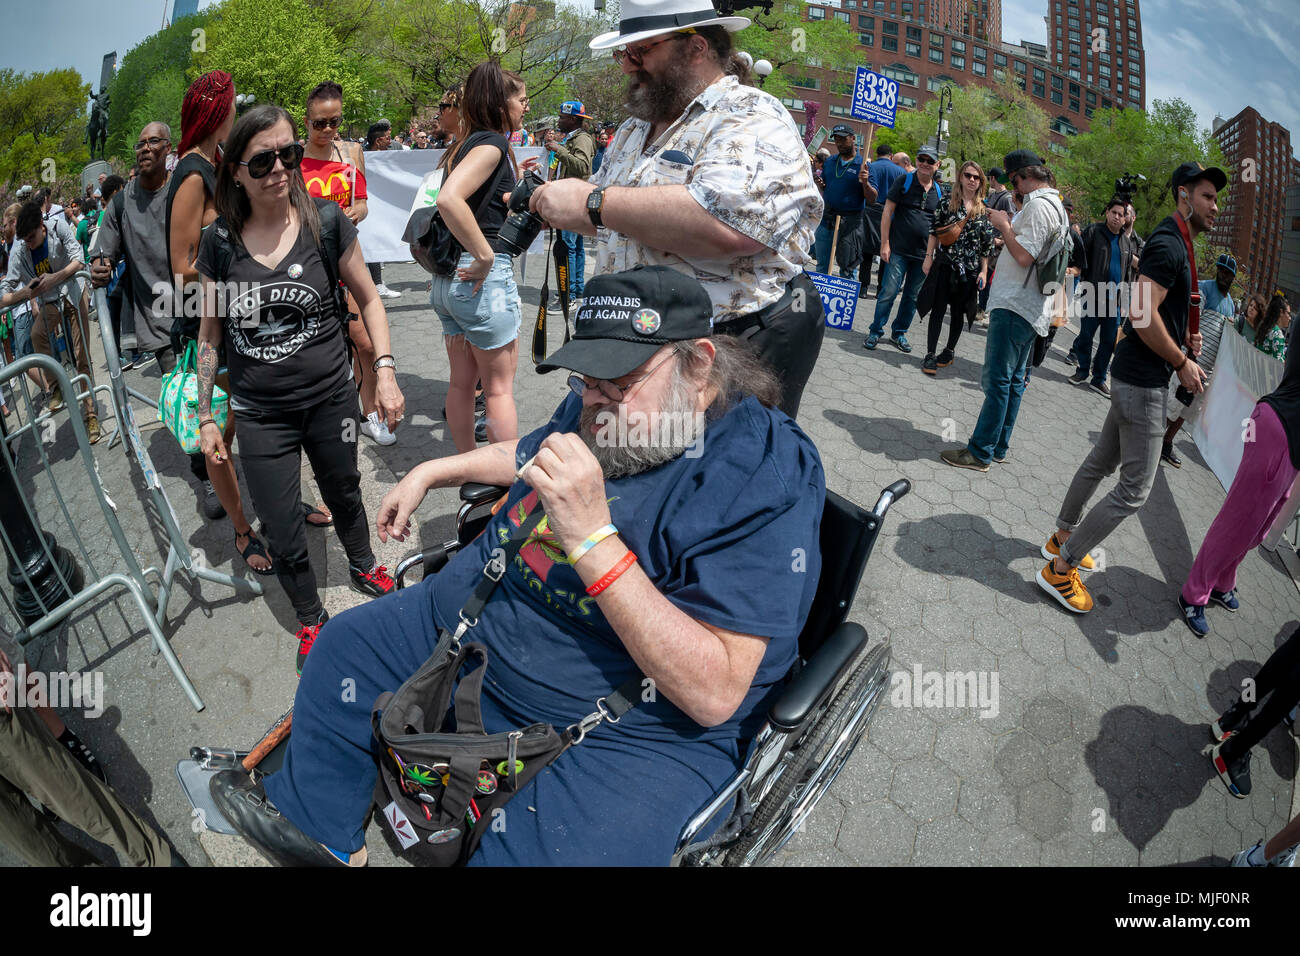 New York, USA. 5th May, 2018. Yippie Pieman Aaron Kaye joins advocates for the legalization of marijuana at the rally in New York on Saturday, May 5, 2018 after the annual NYC Cannabis Parade. The march included a wide range of demographics from millennials to old-time hippies. The participants in the parade are calling for the legalization of marijuana for medical treatment and for recreational uses. (© Richard B. Levine) Credit: Richard Levine/Alamy Live News Stock Photo